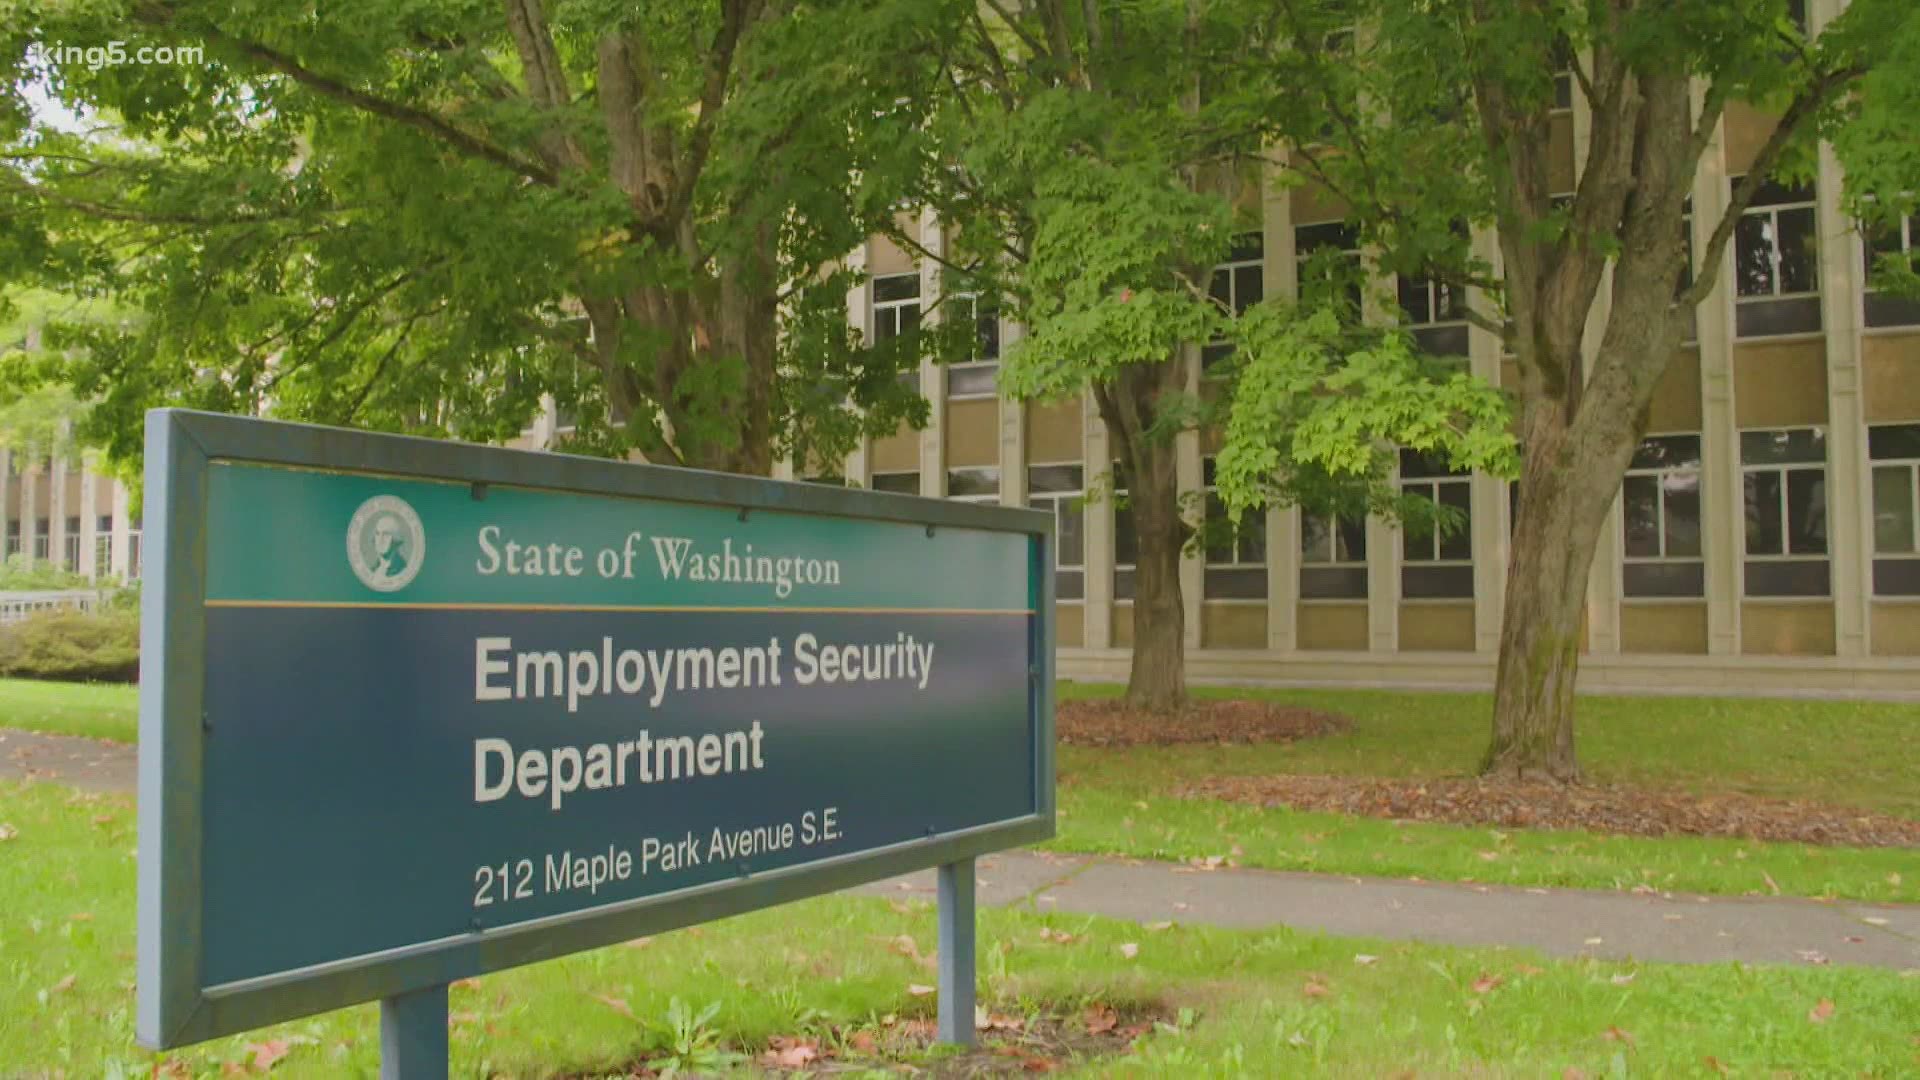 A state audit found Washington's Employment Security Department didn't have adequate controls to prevent hundreds of millions of dollars in fraud this spring.